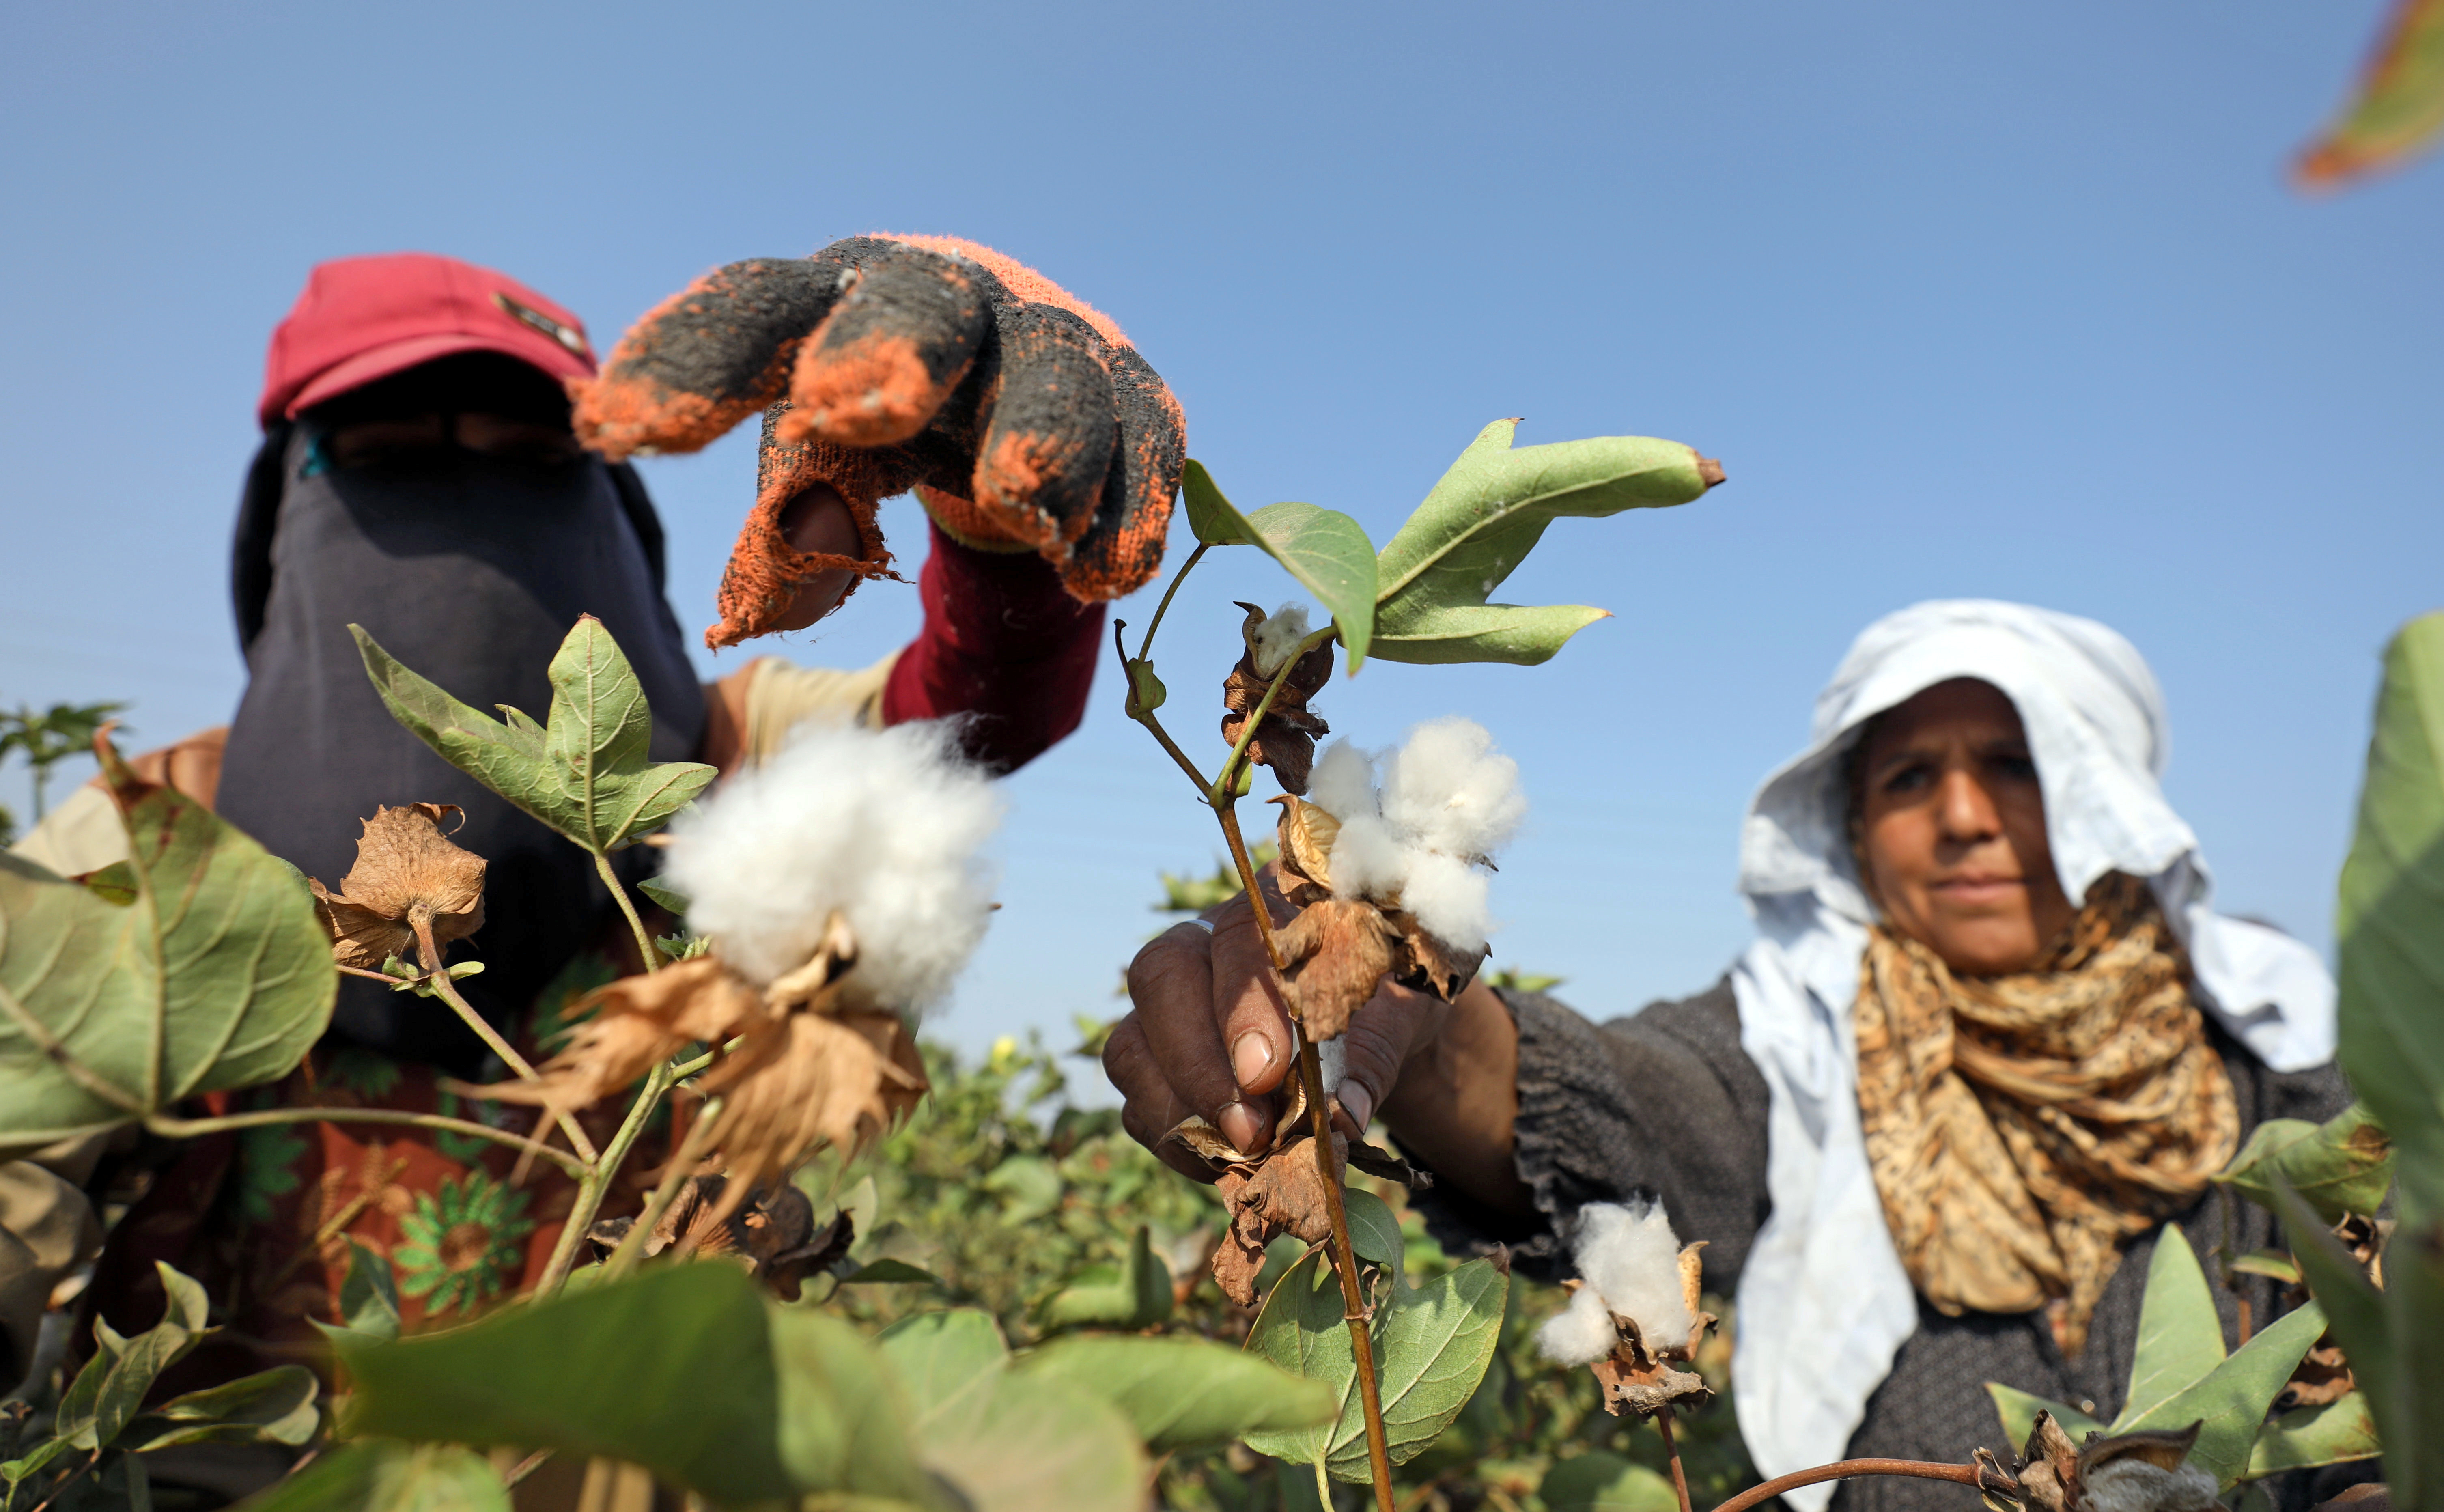 Can the cotton industry protect its workforce in a changing climate?